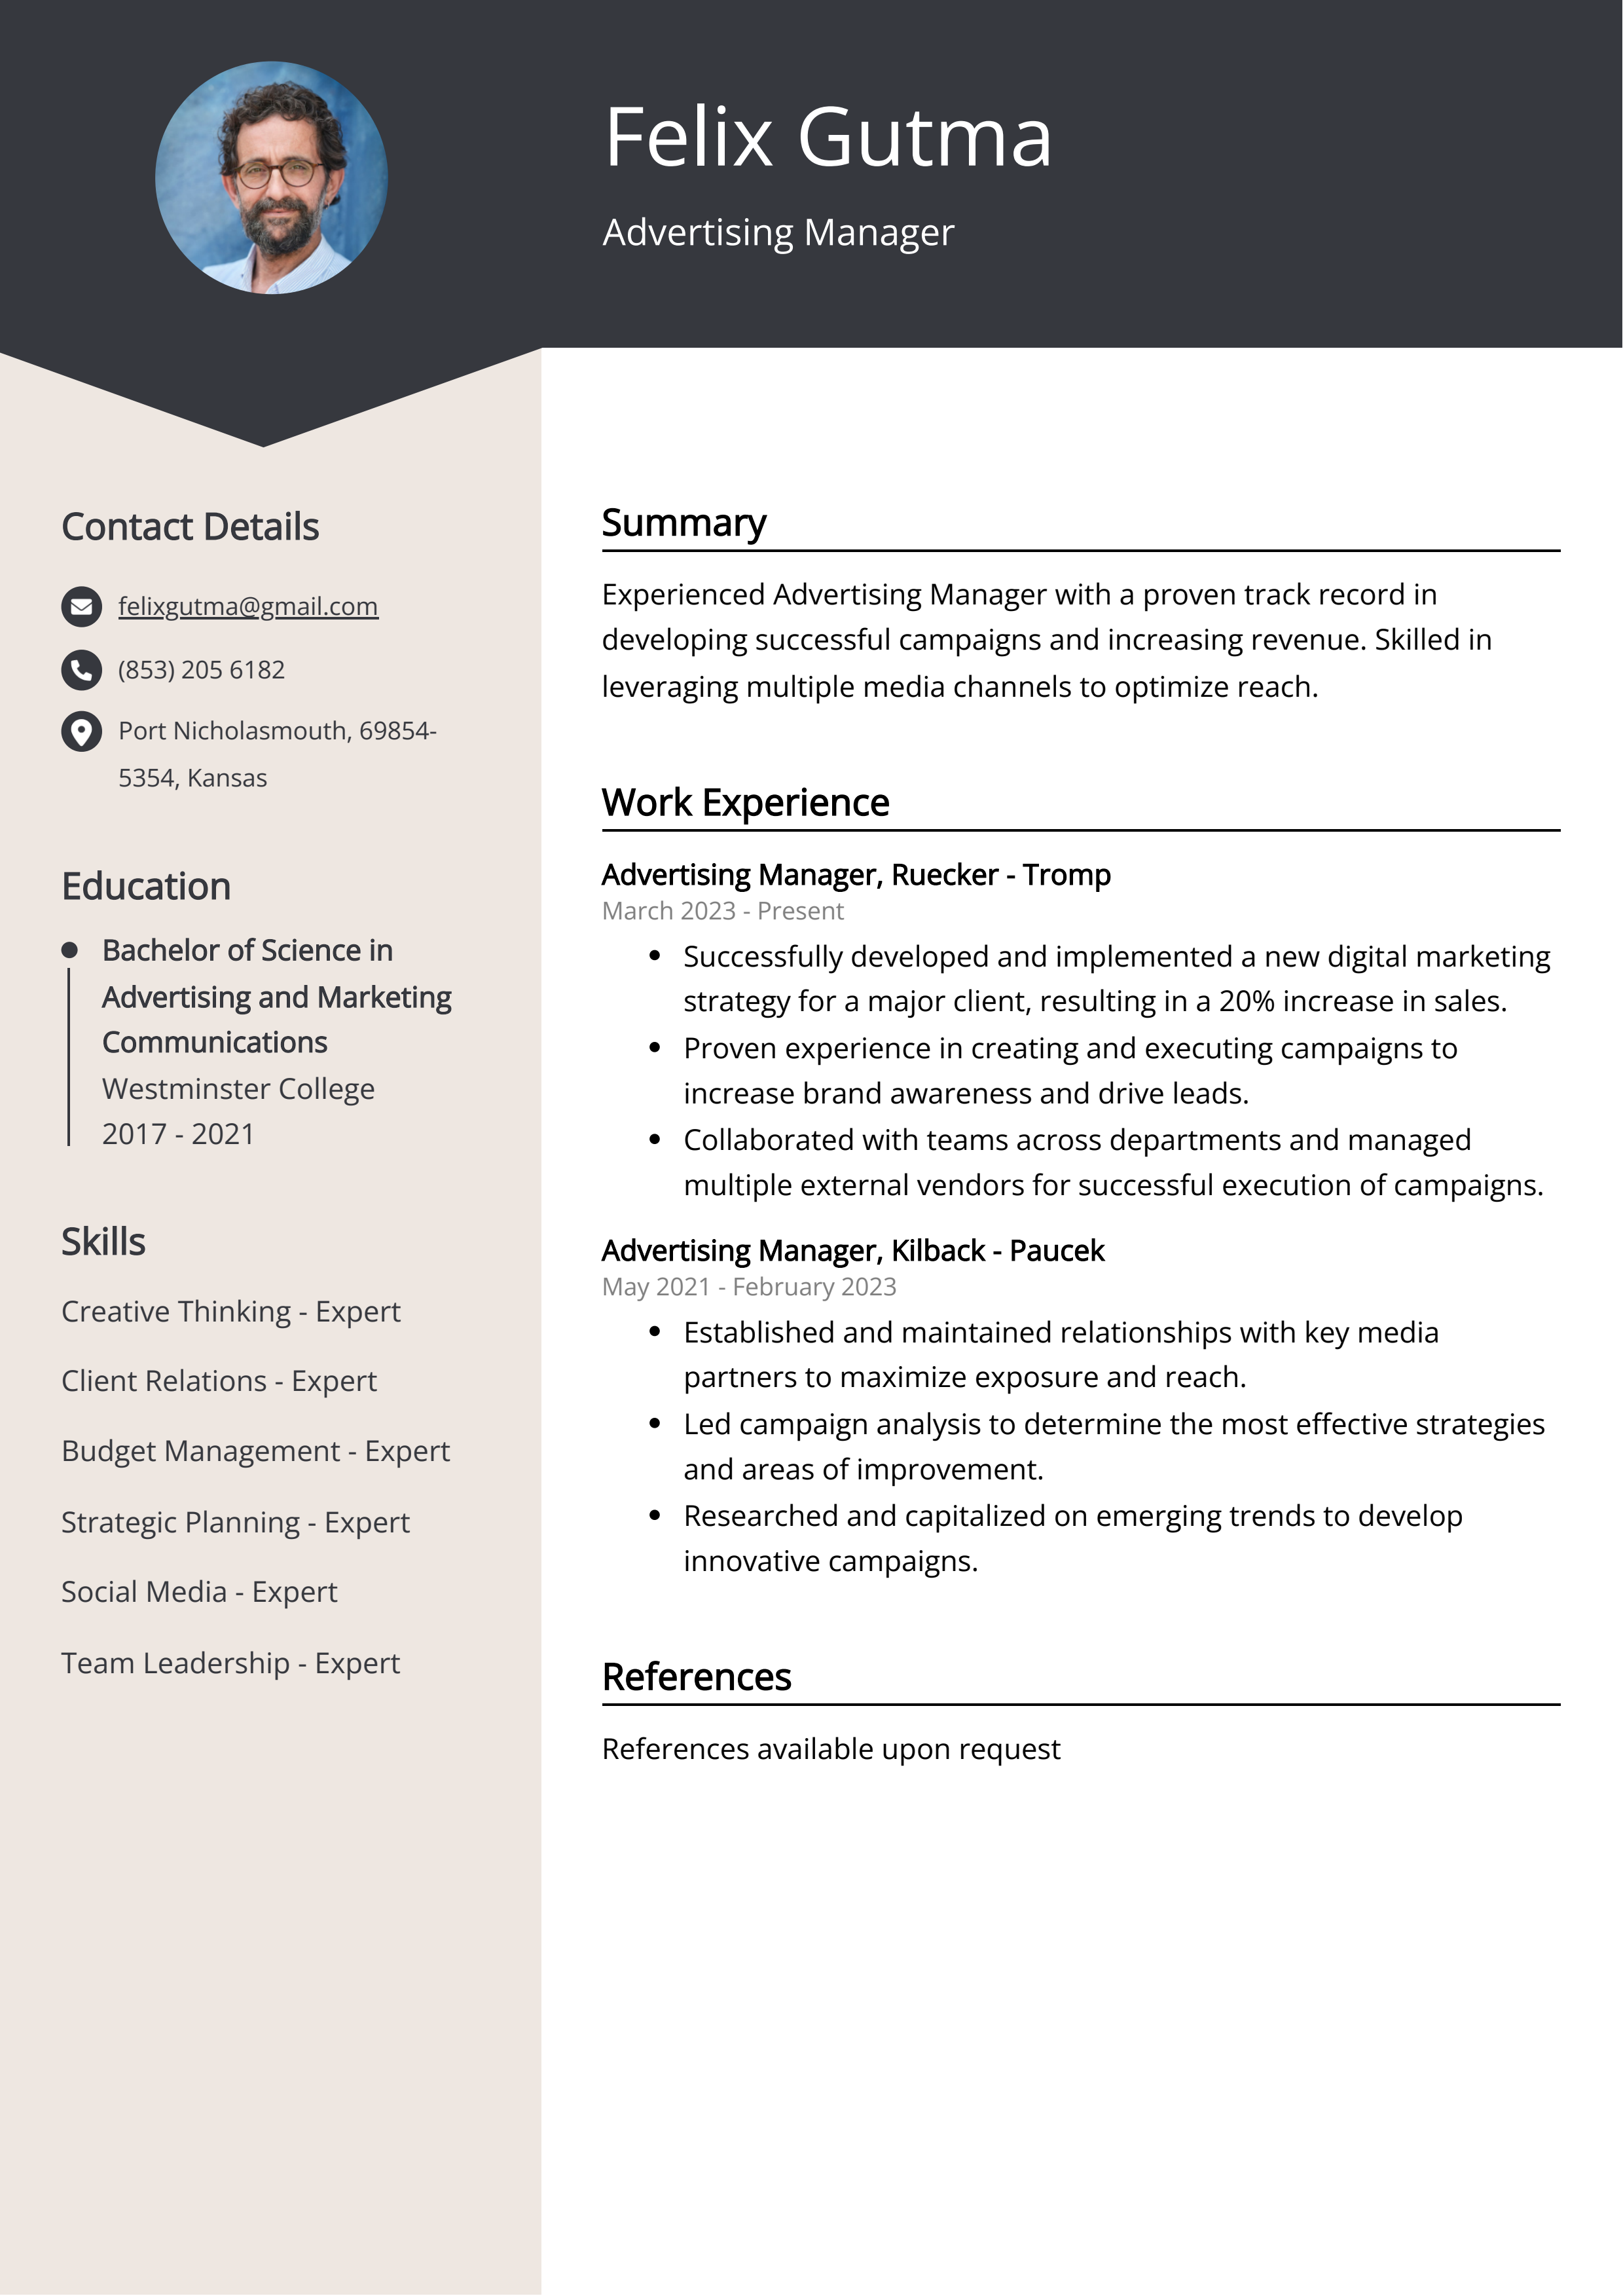 Advertising Manager CV Example